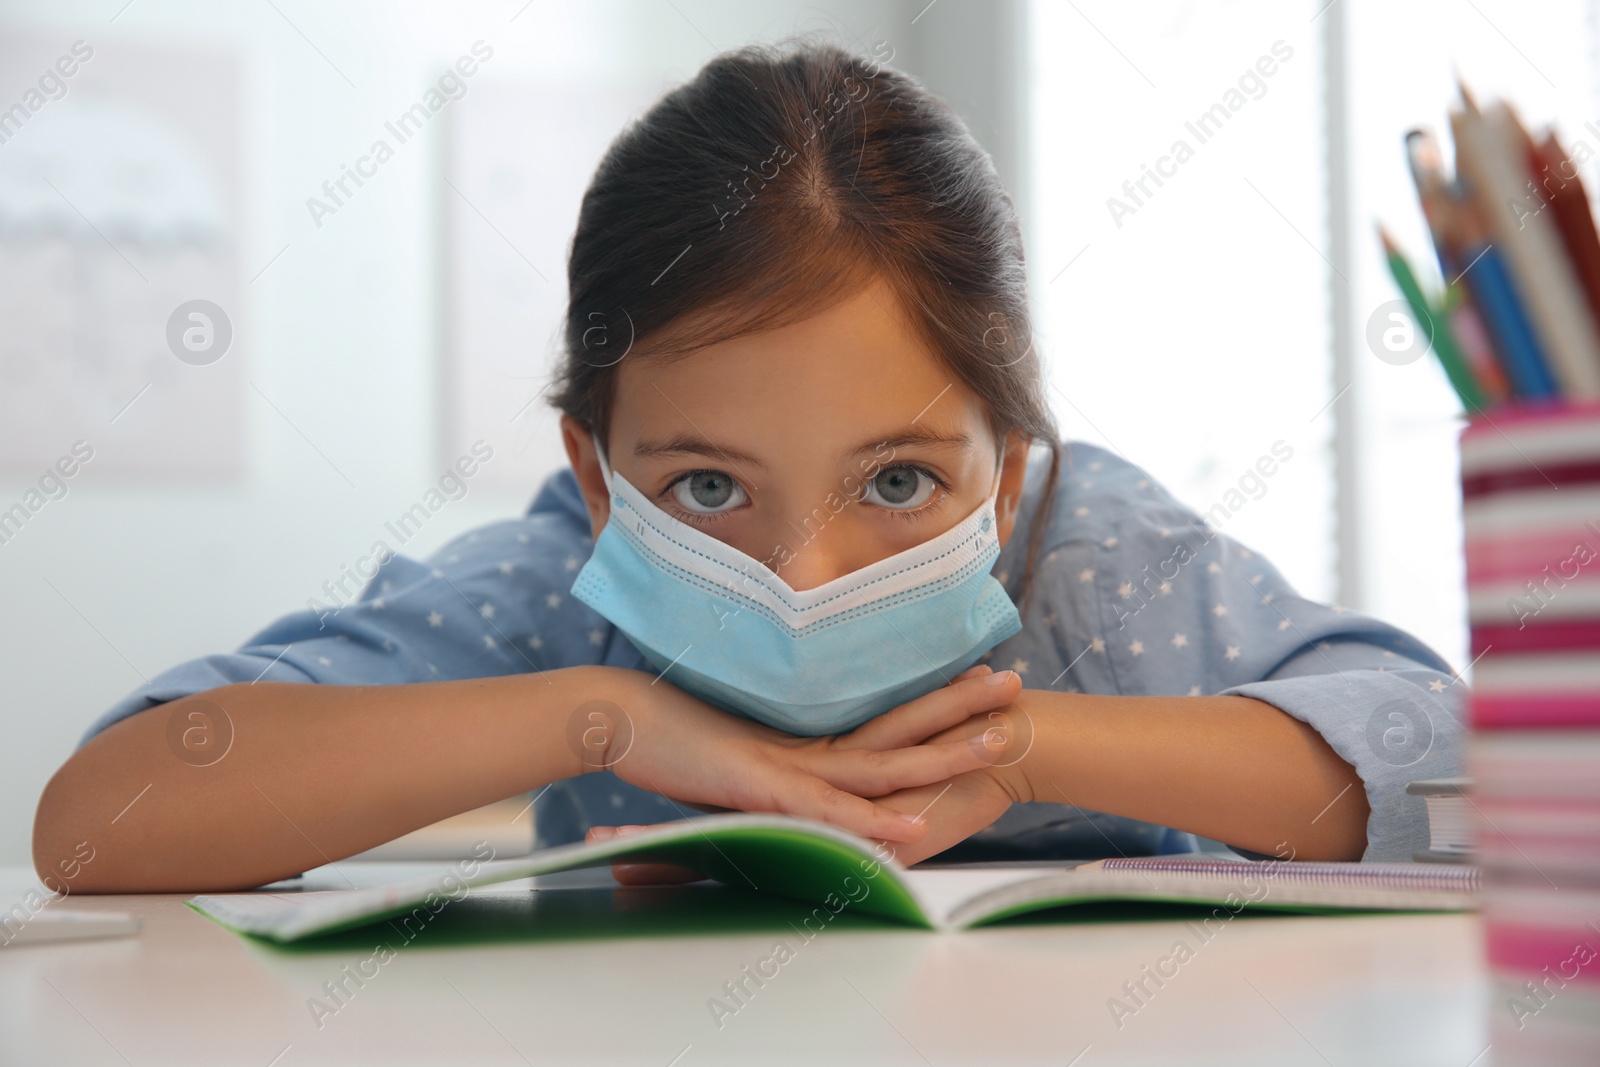 Photo of Distance learning, online studying at home due to Covid-19 pandemic. Girl in protective mask doing homework in room